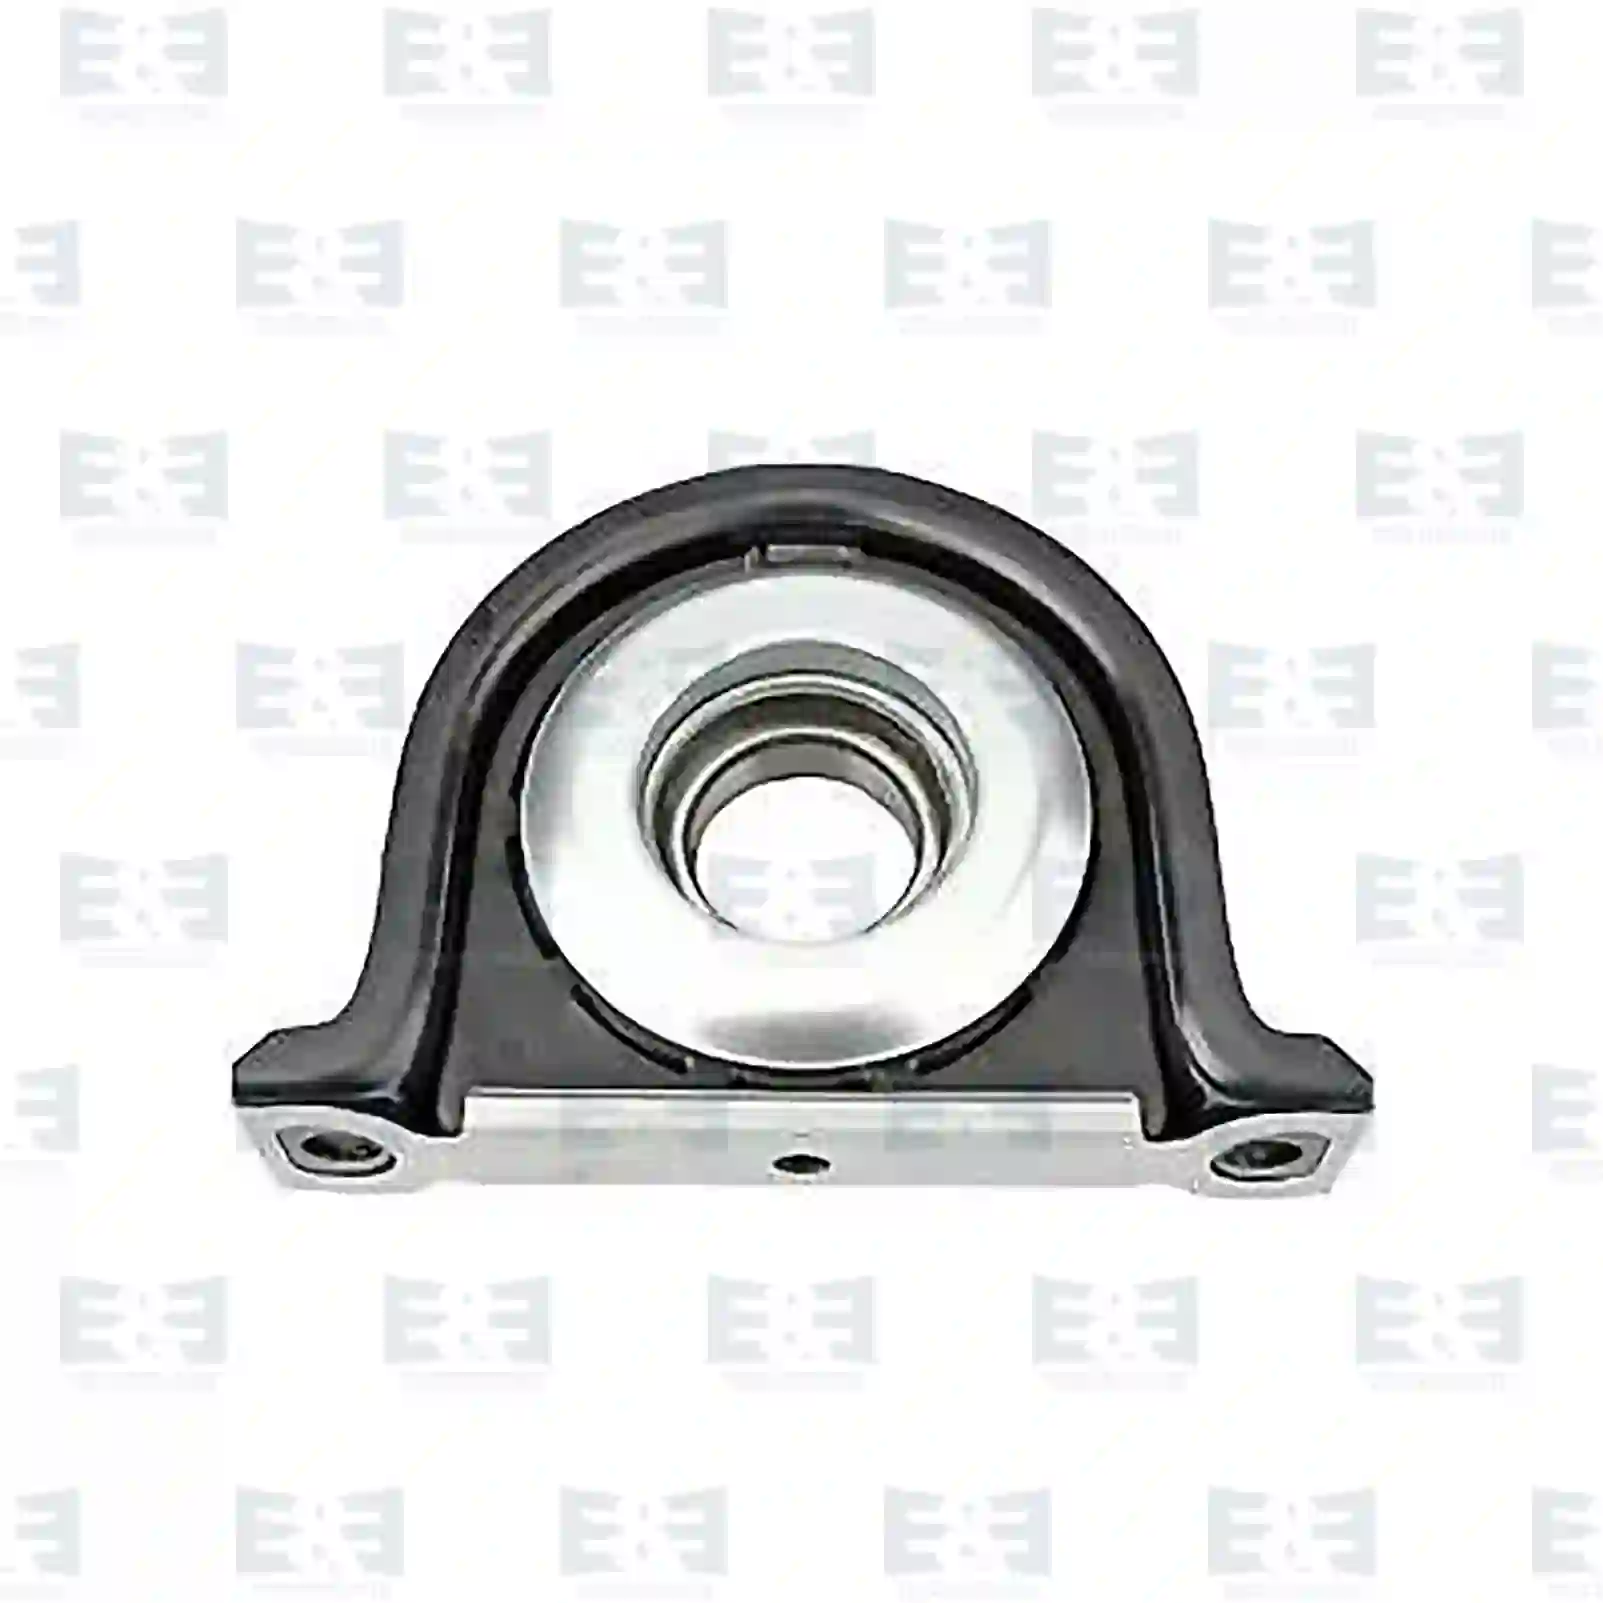 Support Bearing Center bearing, EE No 2E2276780 ,  oem no:5000589888 E&E Truck Spare Parts | Truck Spare Parts, Auotomotive Spare Parts